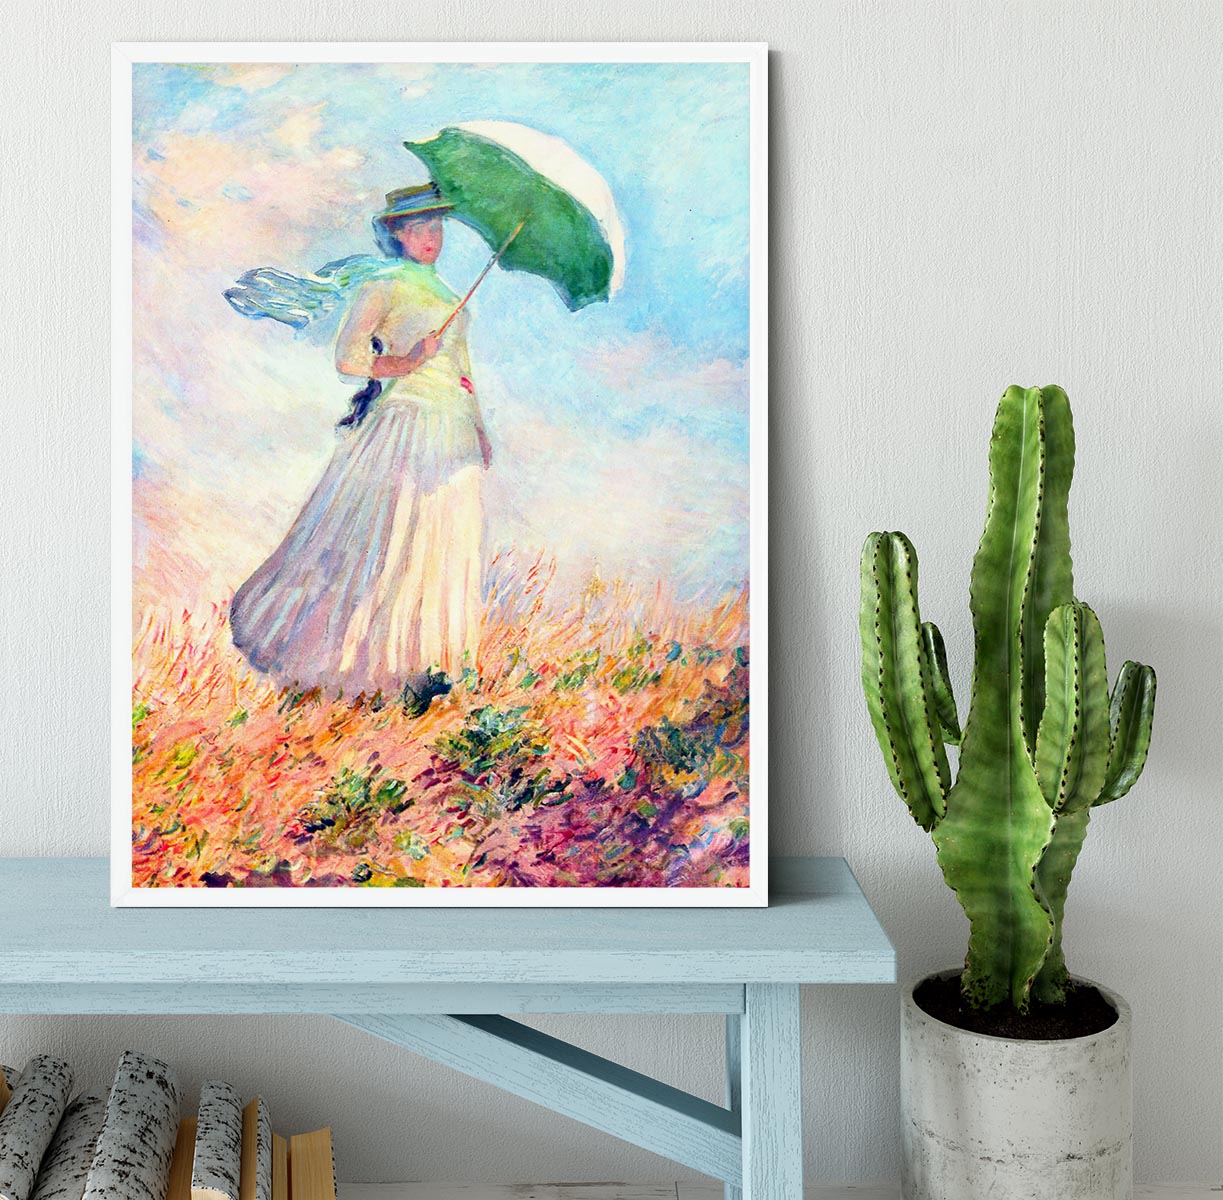 Lady with sunshade study by Monet Framed Print - Canvas Art Rocks -6